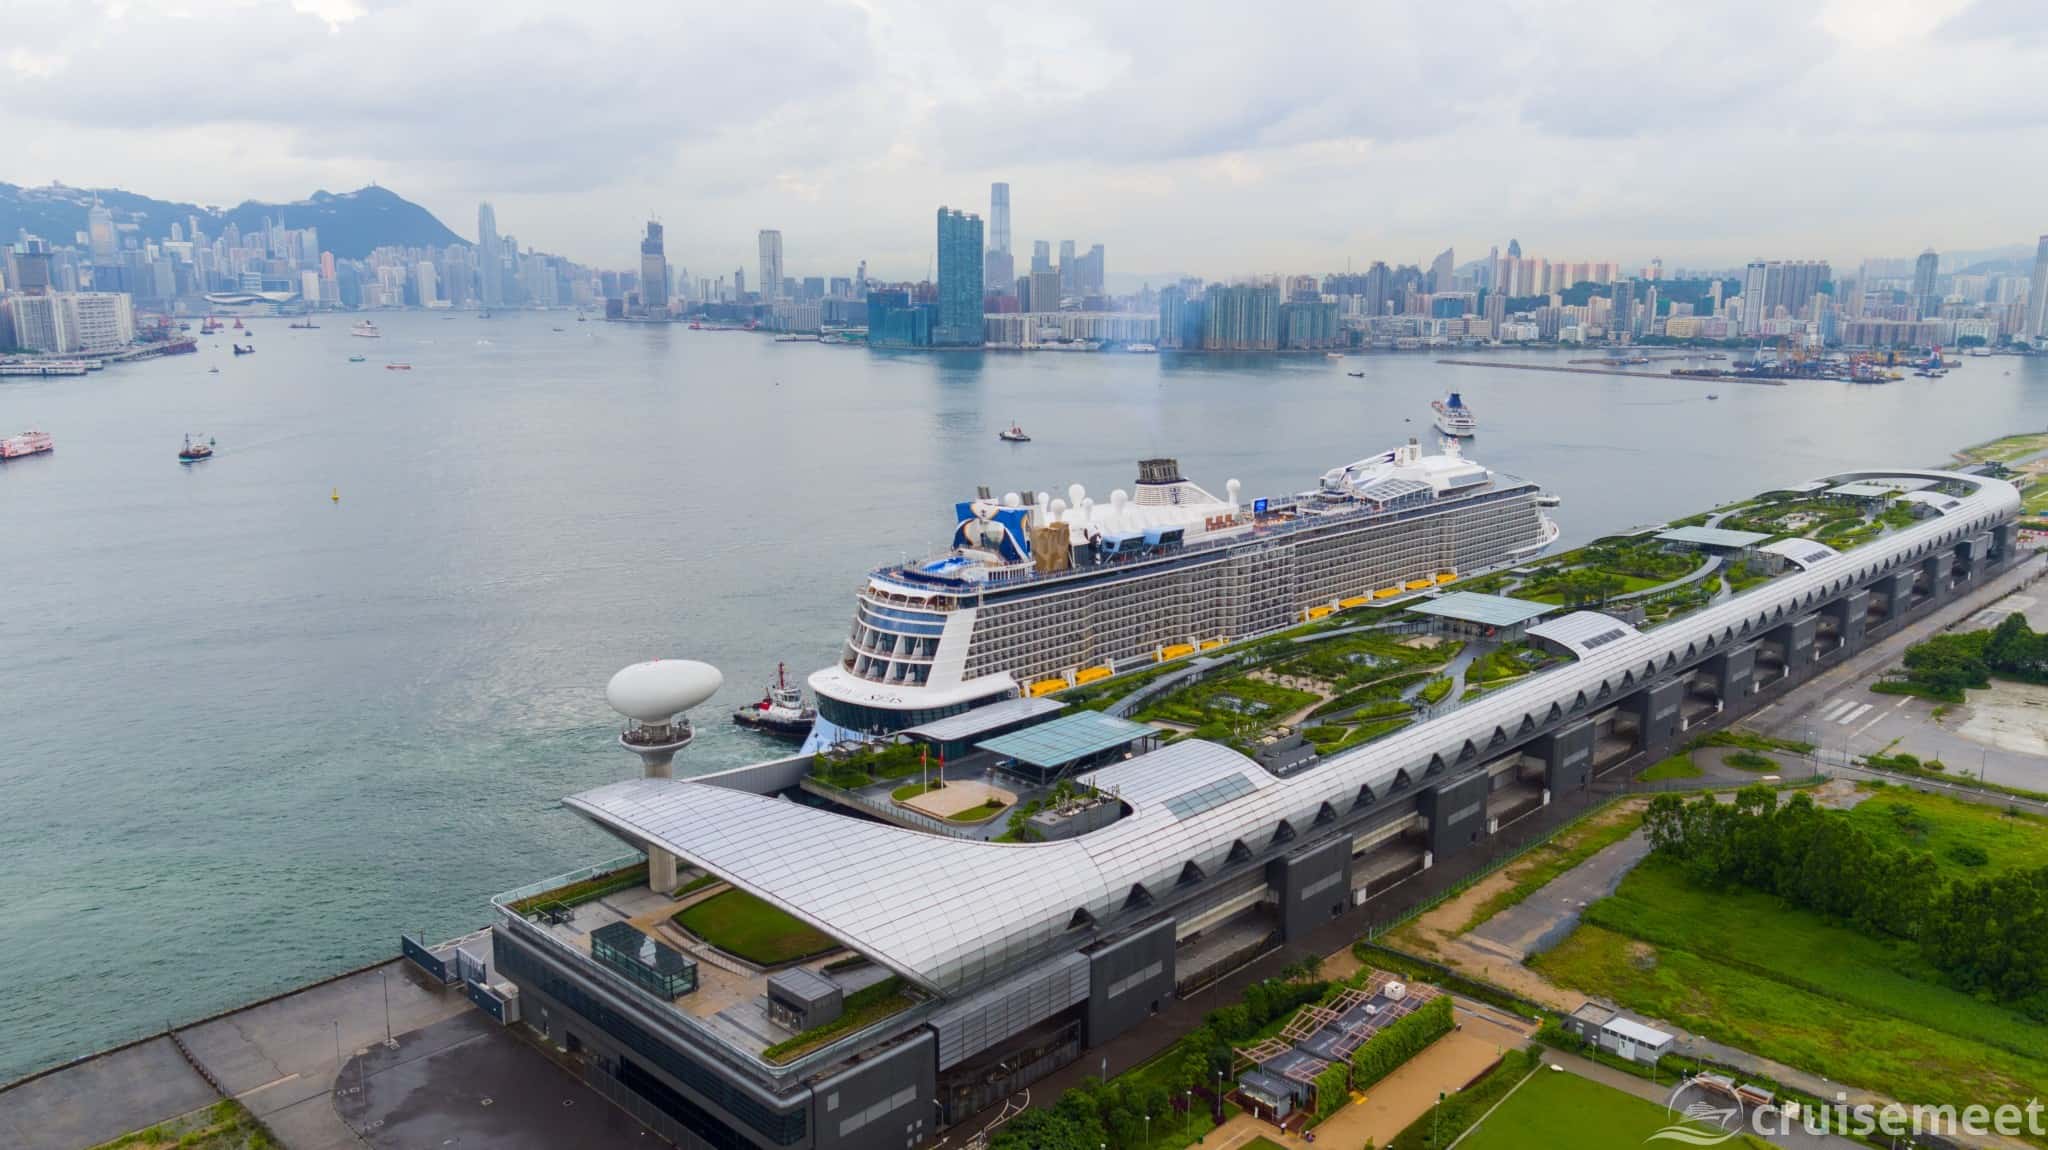 Ovation of the Seas arrives in Hong King, China